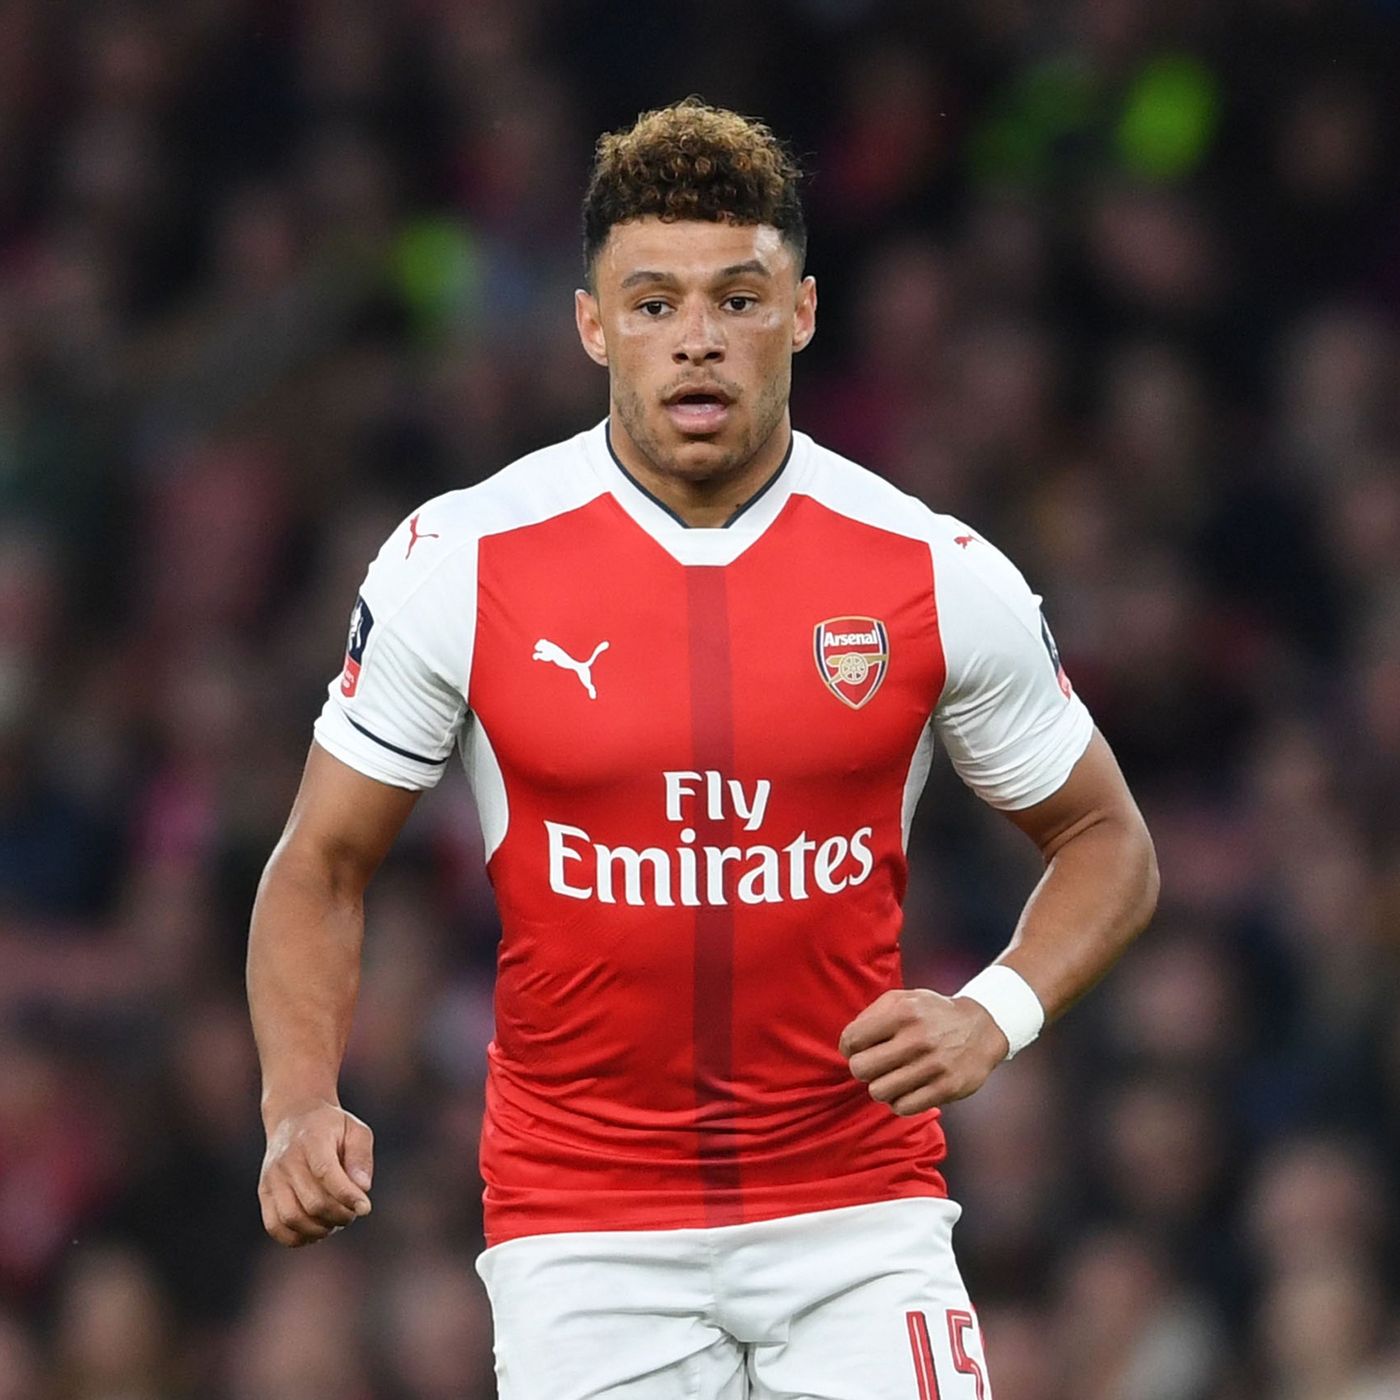 Should Ox stay or should he go?